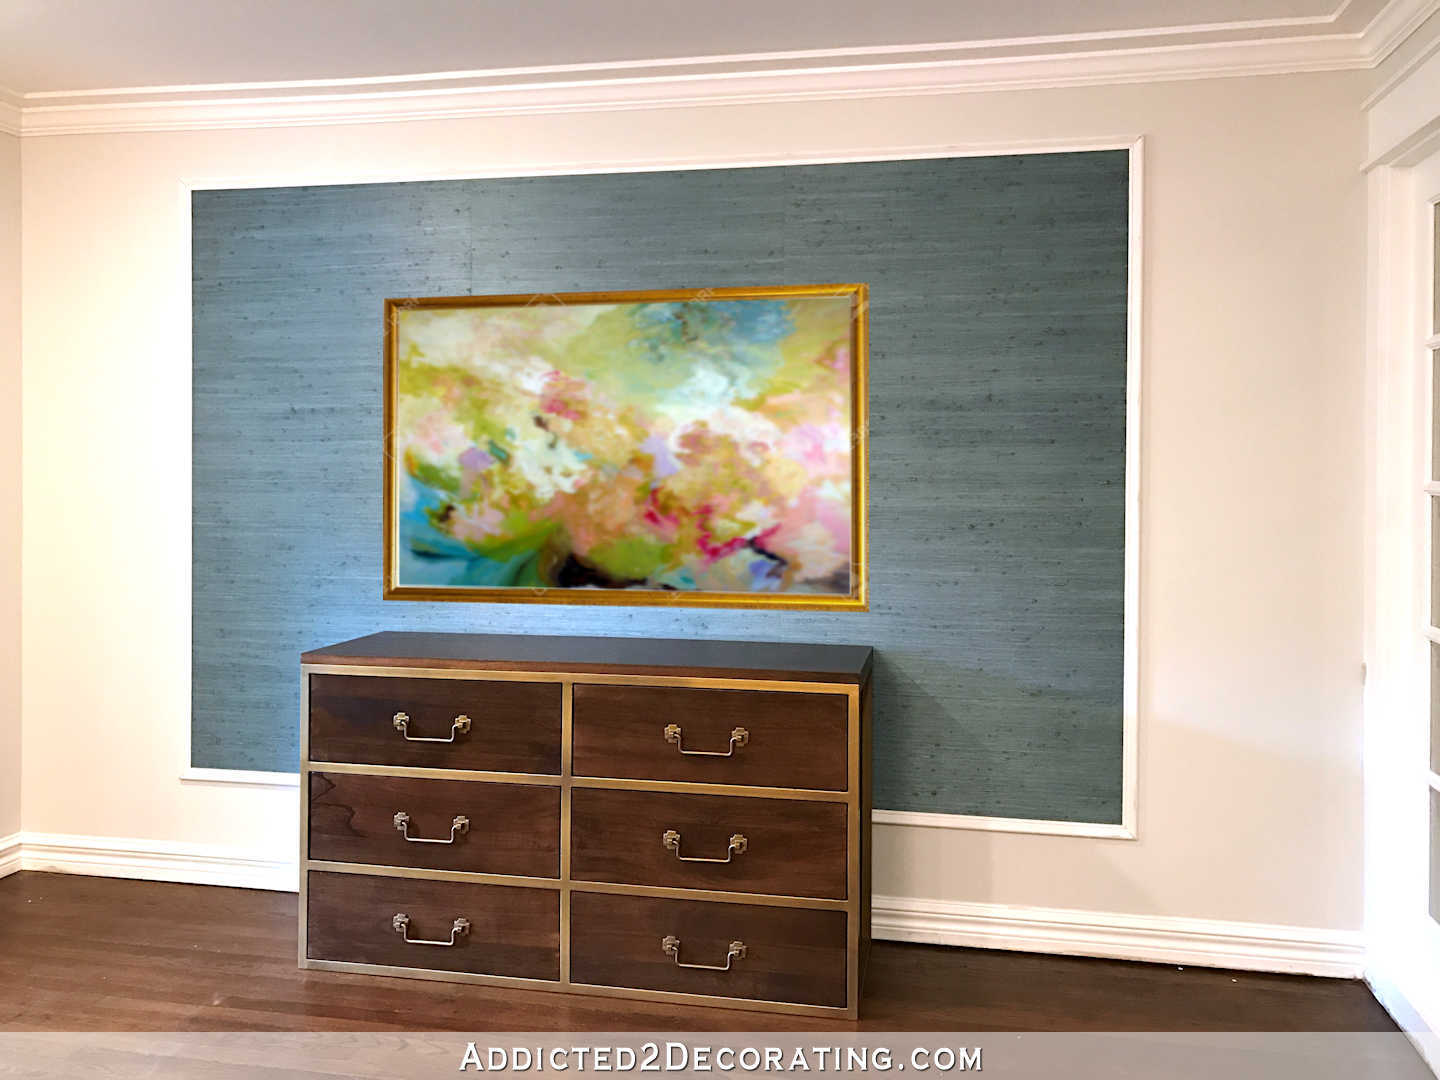 A New Credenza For The Entryway